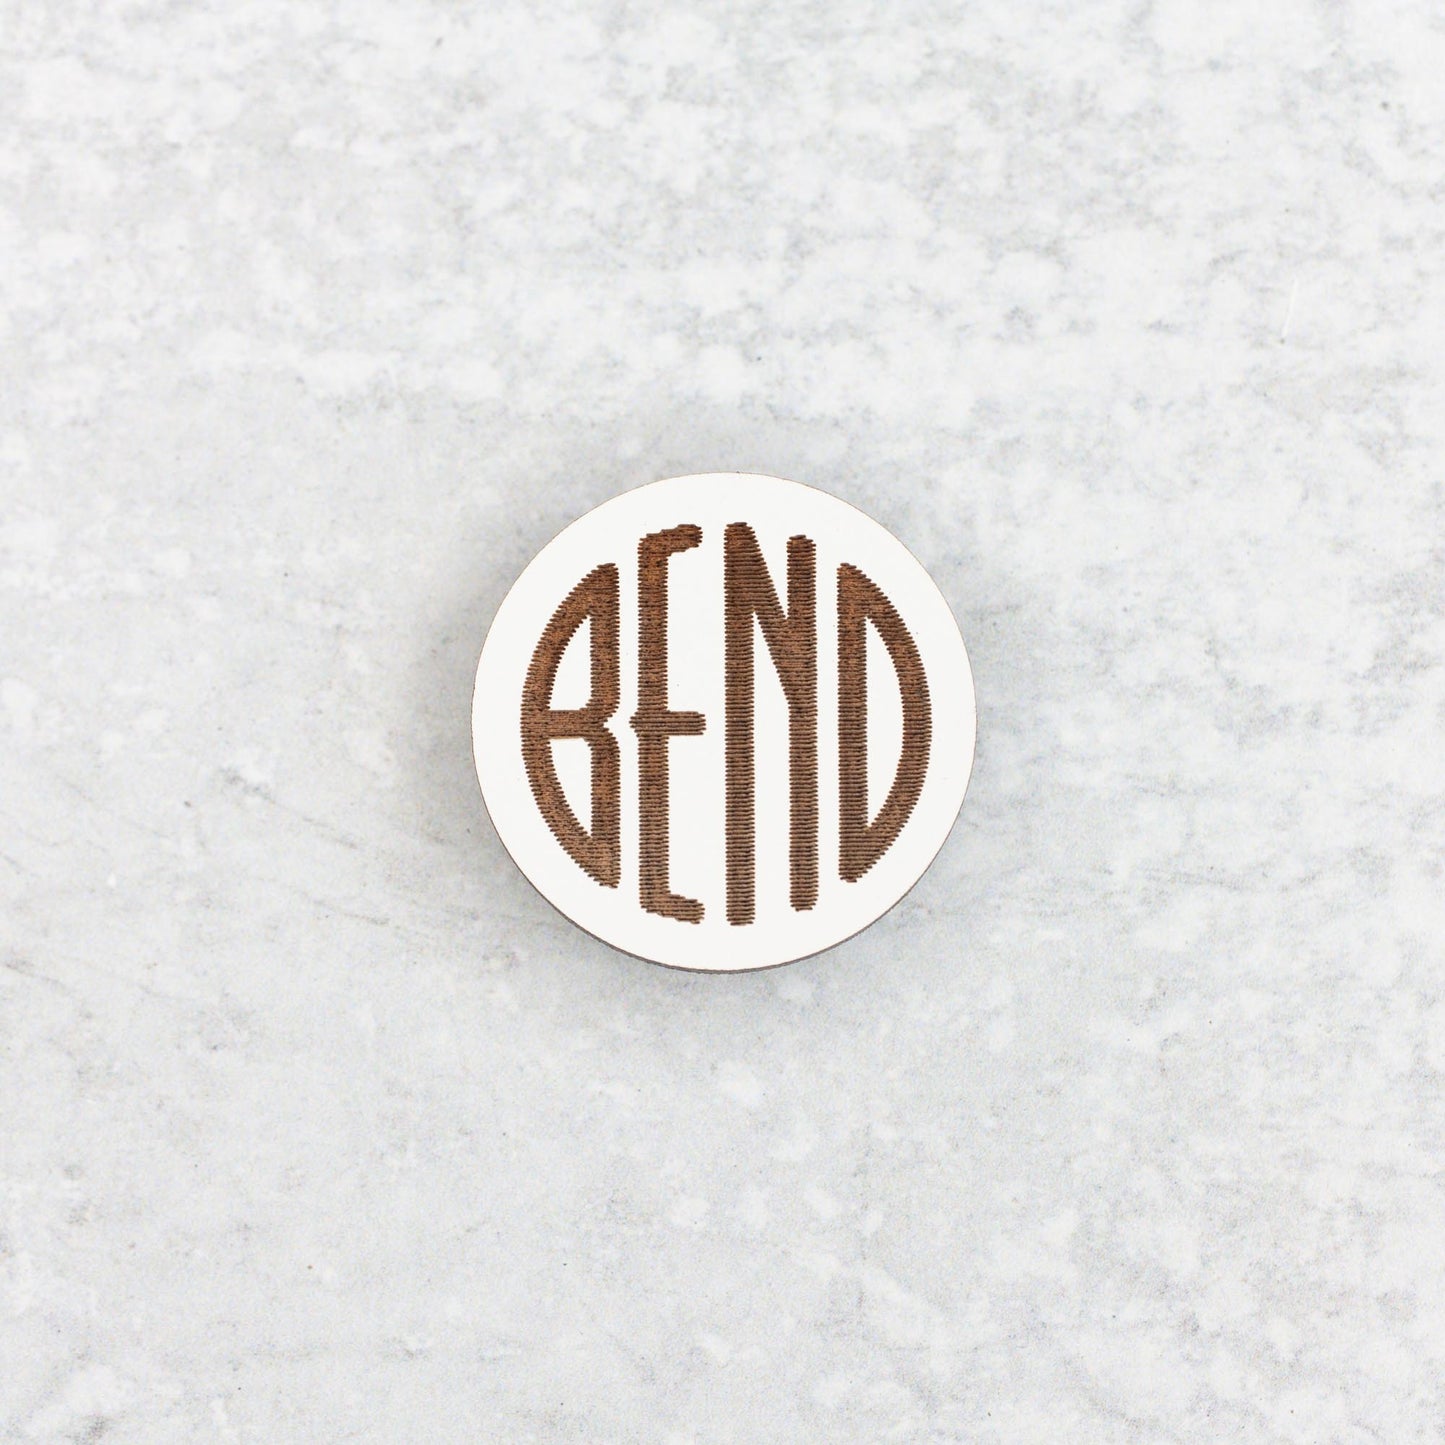 Decorative Refrigerator Magnets - Wood Magnets Bend Logo White Wood by LeeMo Designs in Bend, Oregon